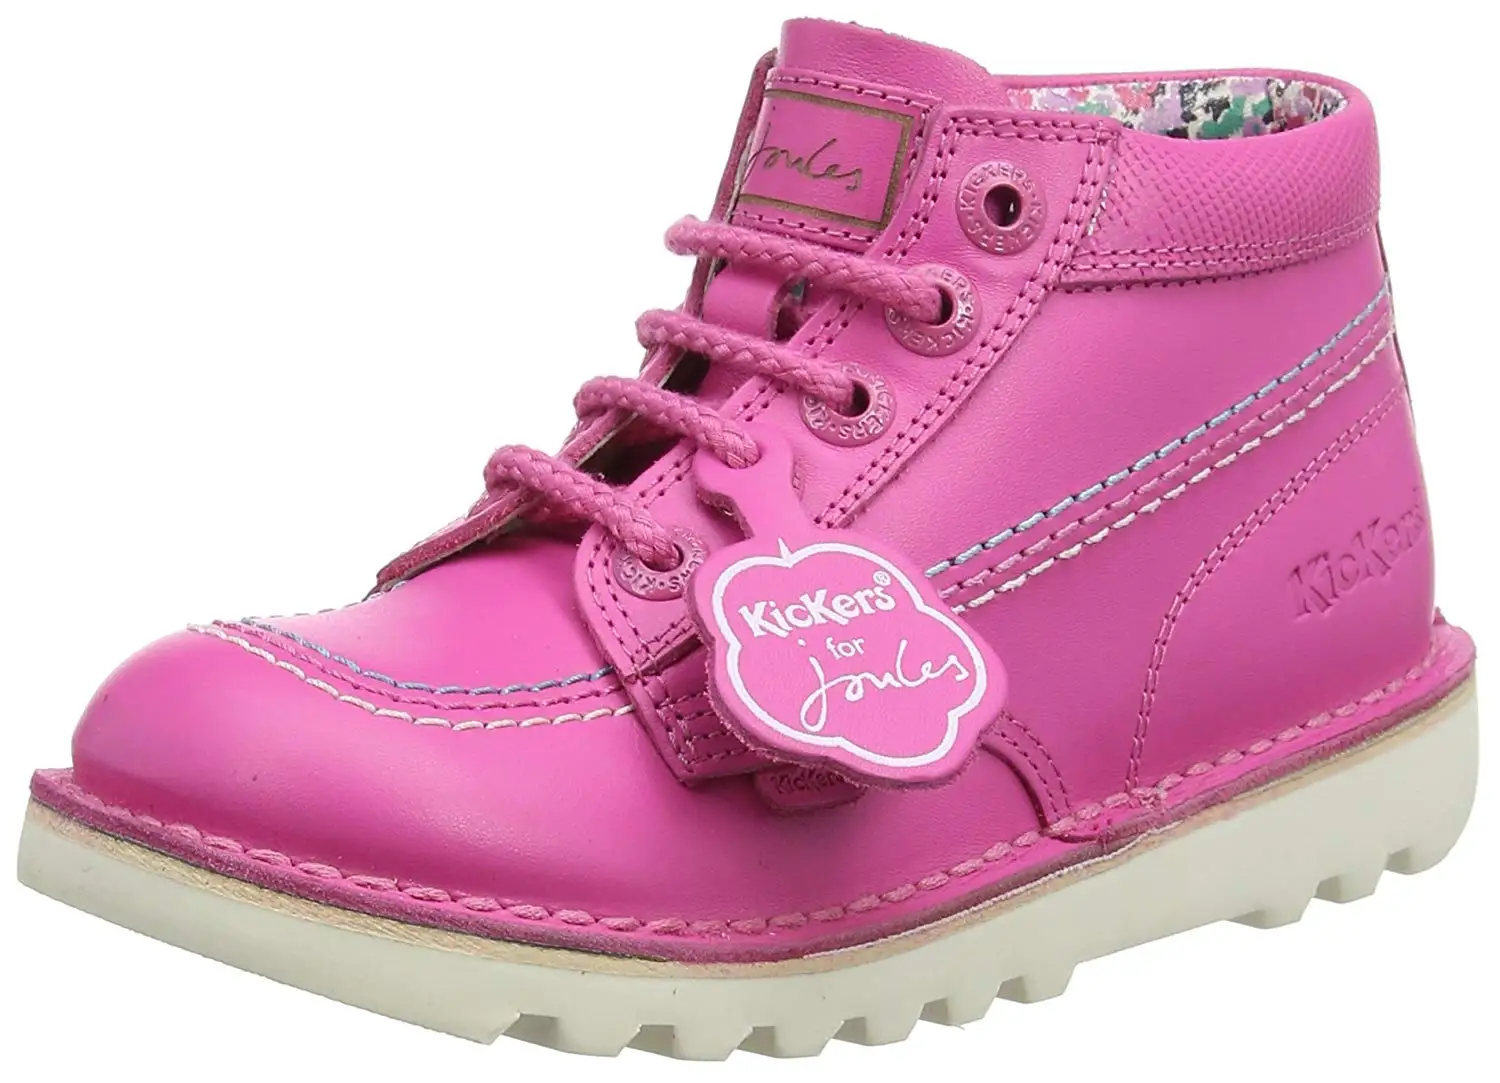 Cheap Kickers Pink, find Kickers Pink deals on line at Alibaba.com